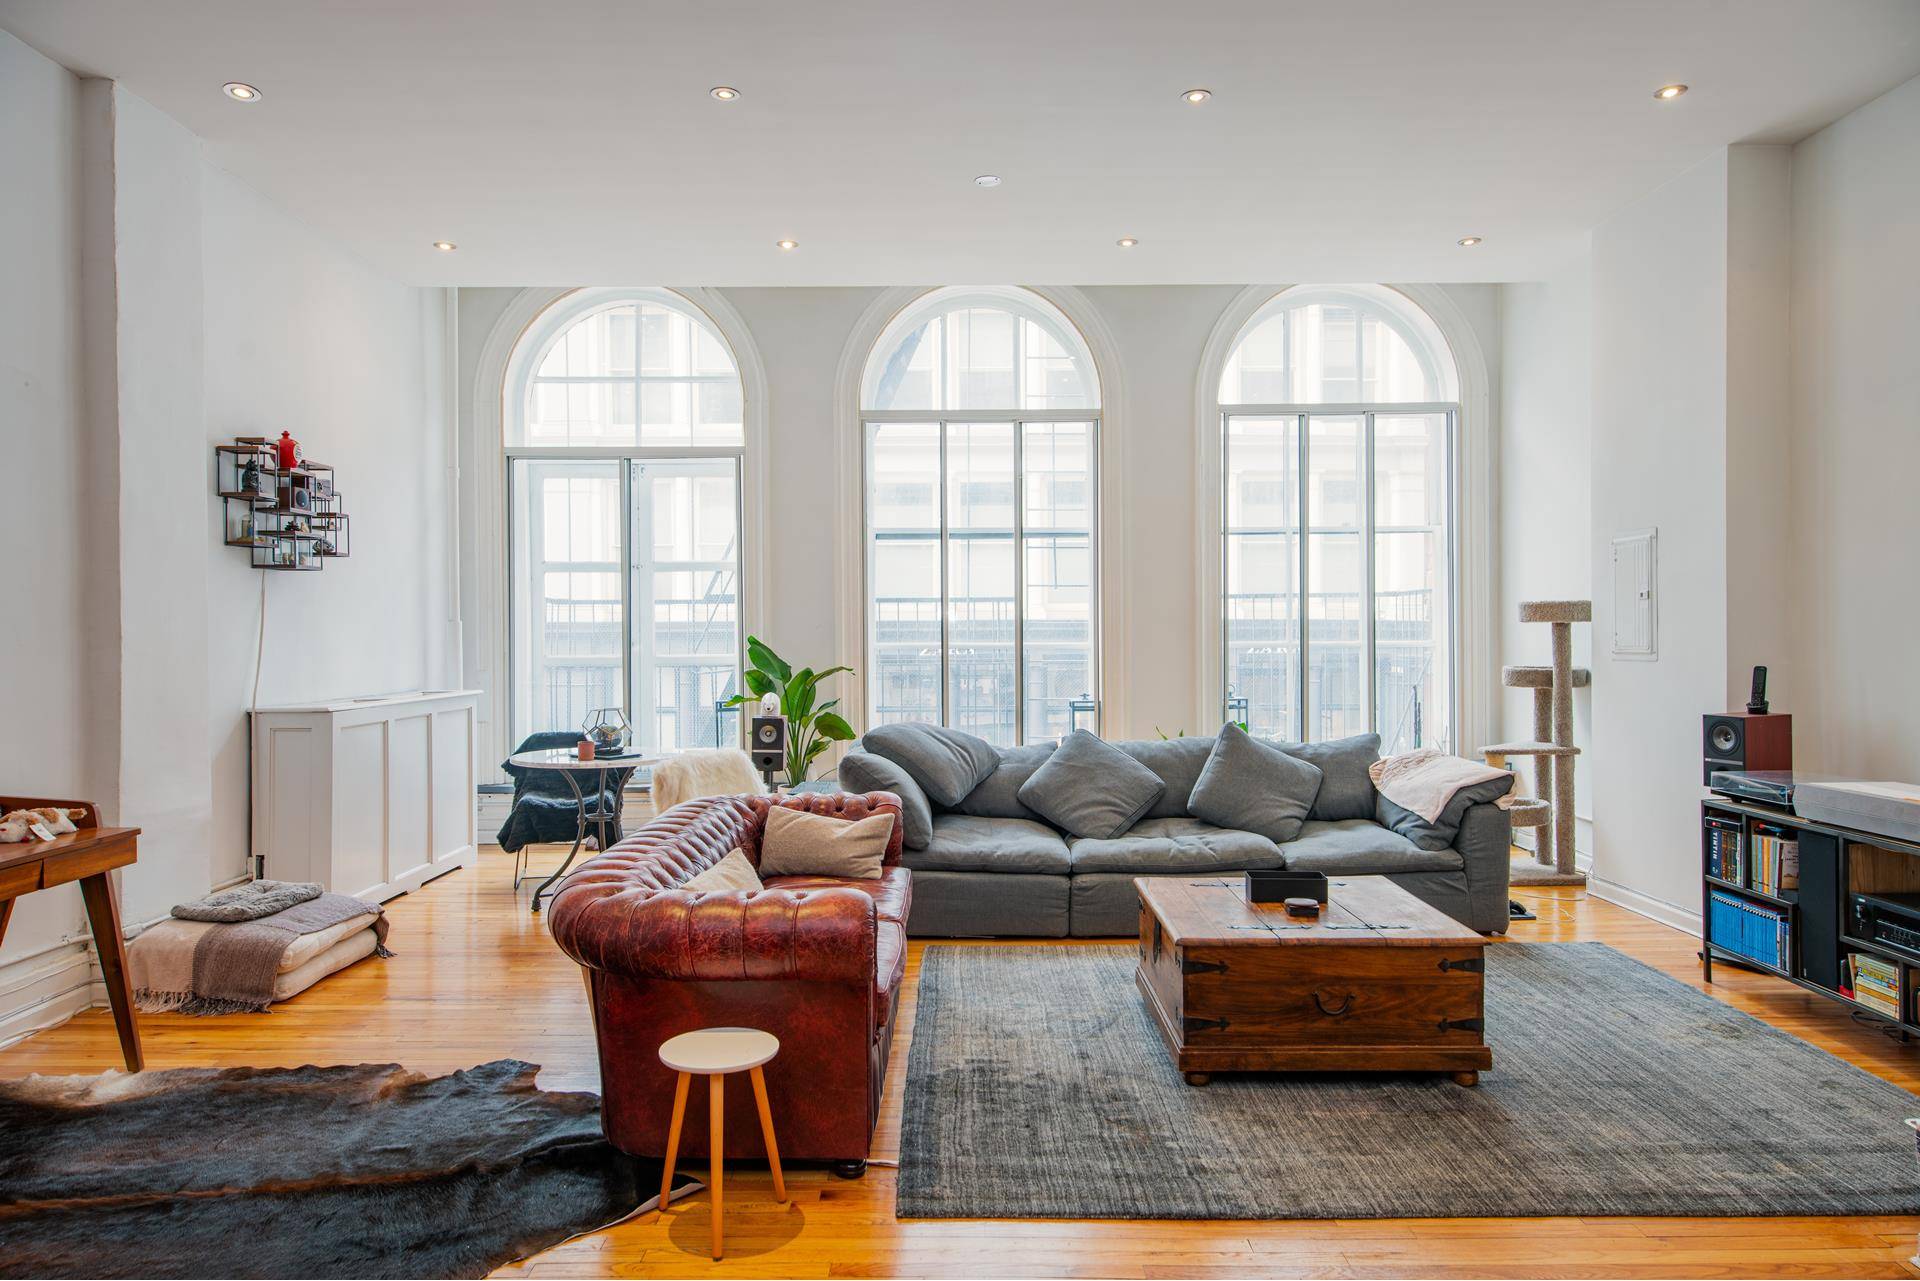 Authentic massive, full floor Loft offering 13 foot ceilings and large windows allowing for excellent natural light through double exposures in the heart of SoHo between Spring and Broome.